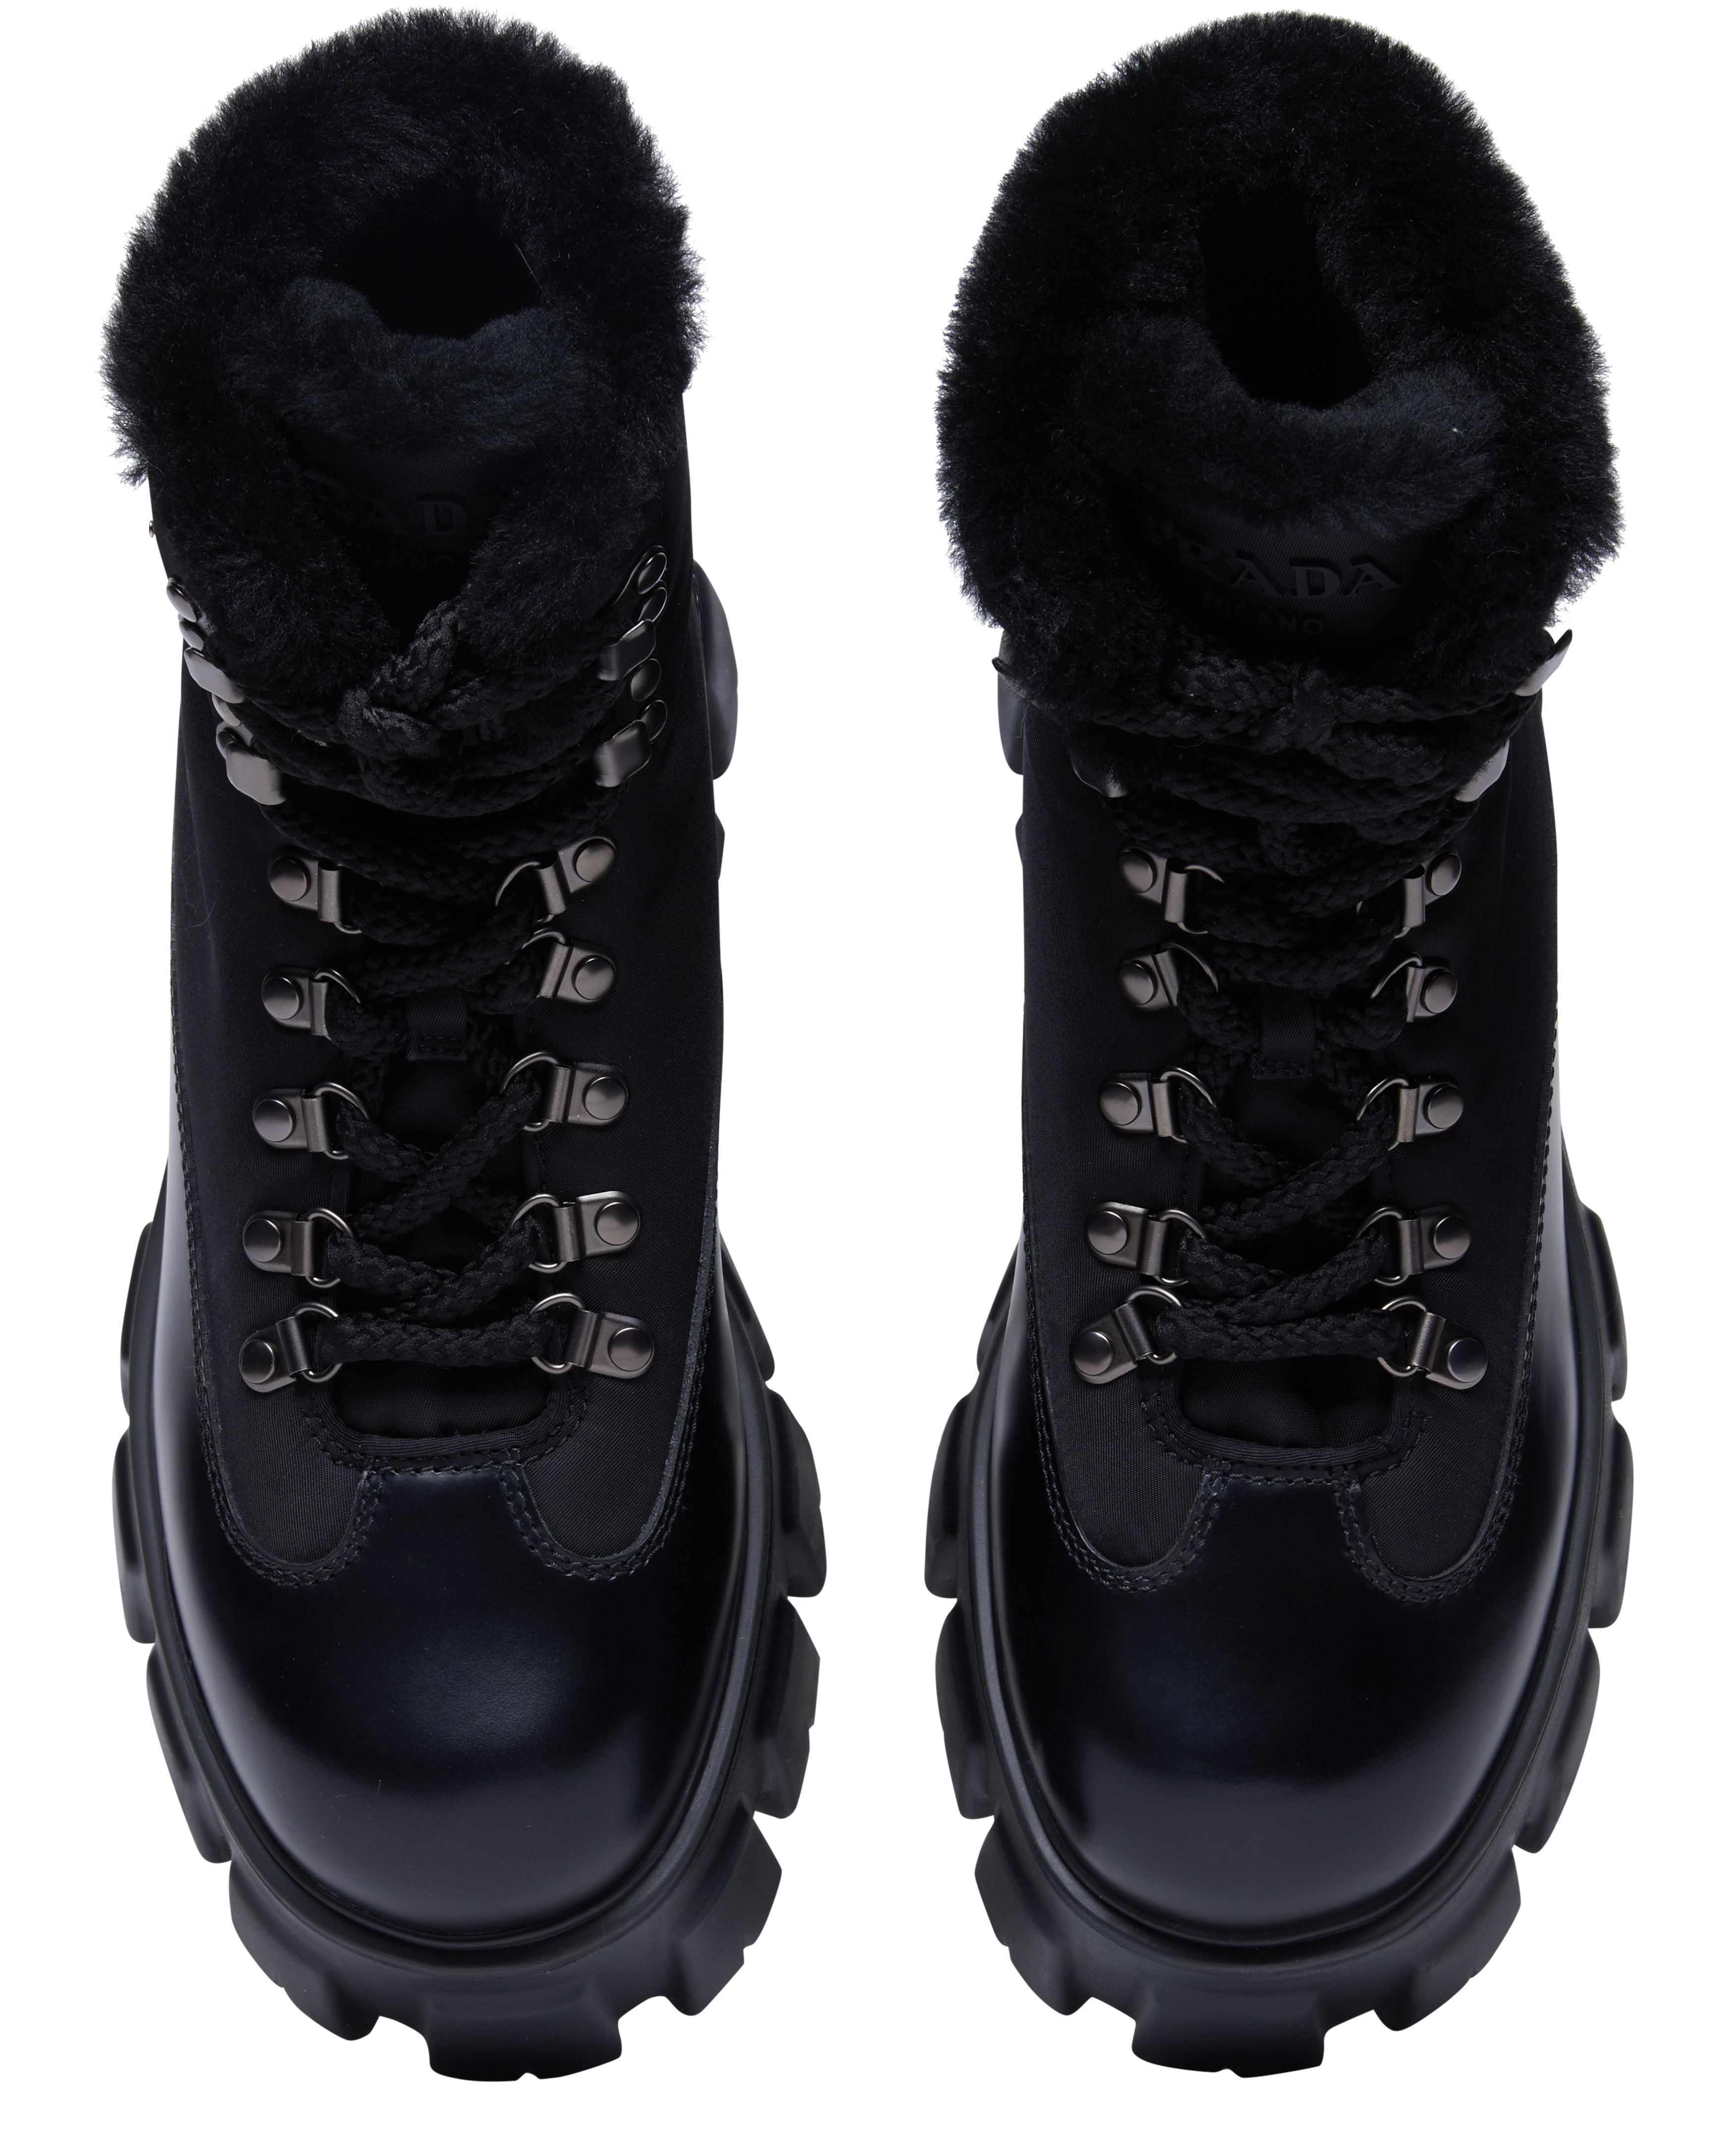 Prada Lined boots